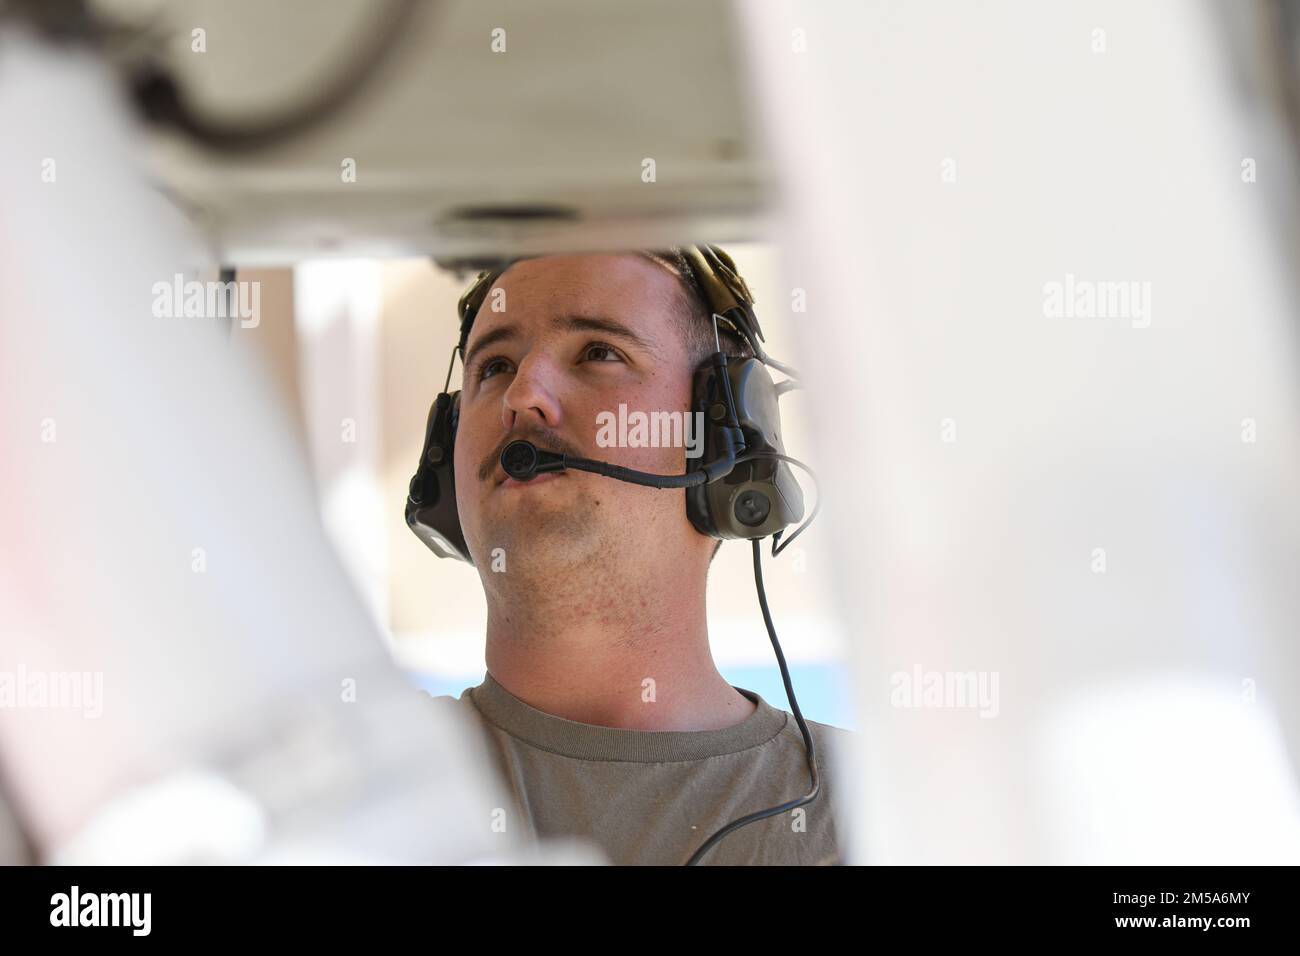 U.S. Air Force Staff Sgt. Noah Kincel, A-10C Thunderbolt II Demonstration Team lead crew chief, performs post-flight checks at Davis-Monthan Air Force Base, Feb. 14, 2022. As the lead crew chief for the team, Kincel provides oversight and guidance on all maintenance operations. Stock Photo